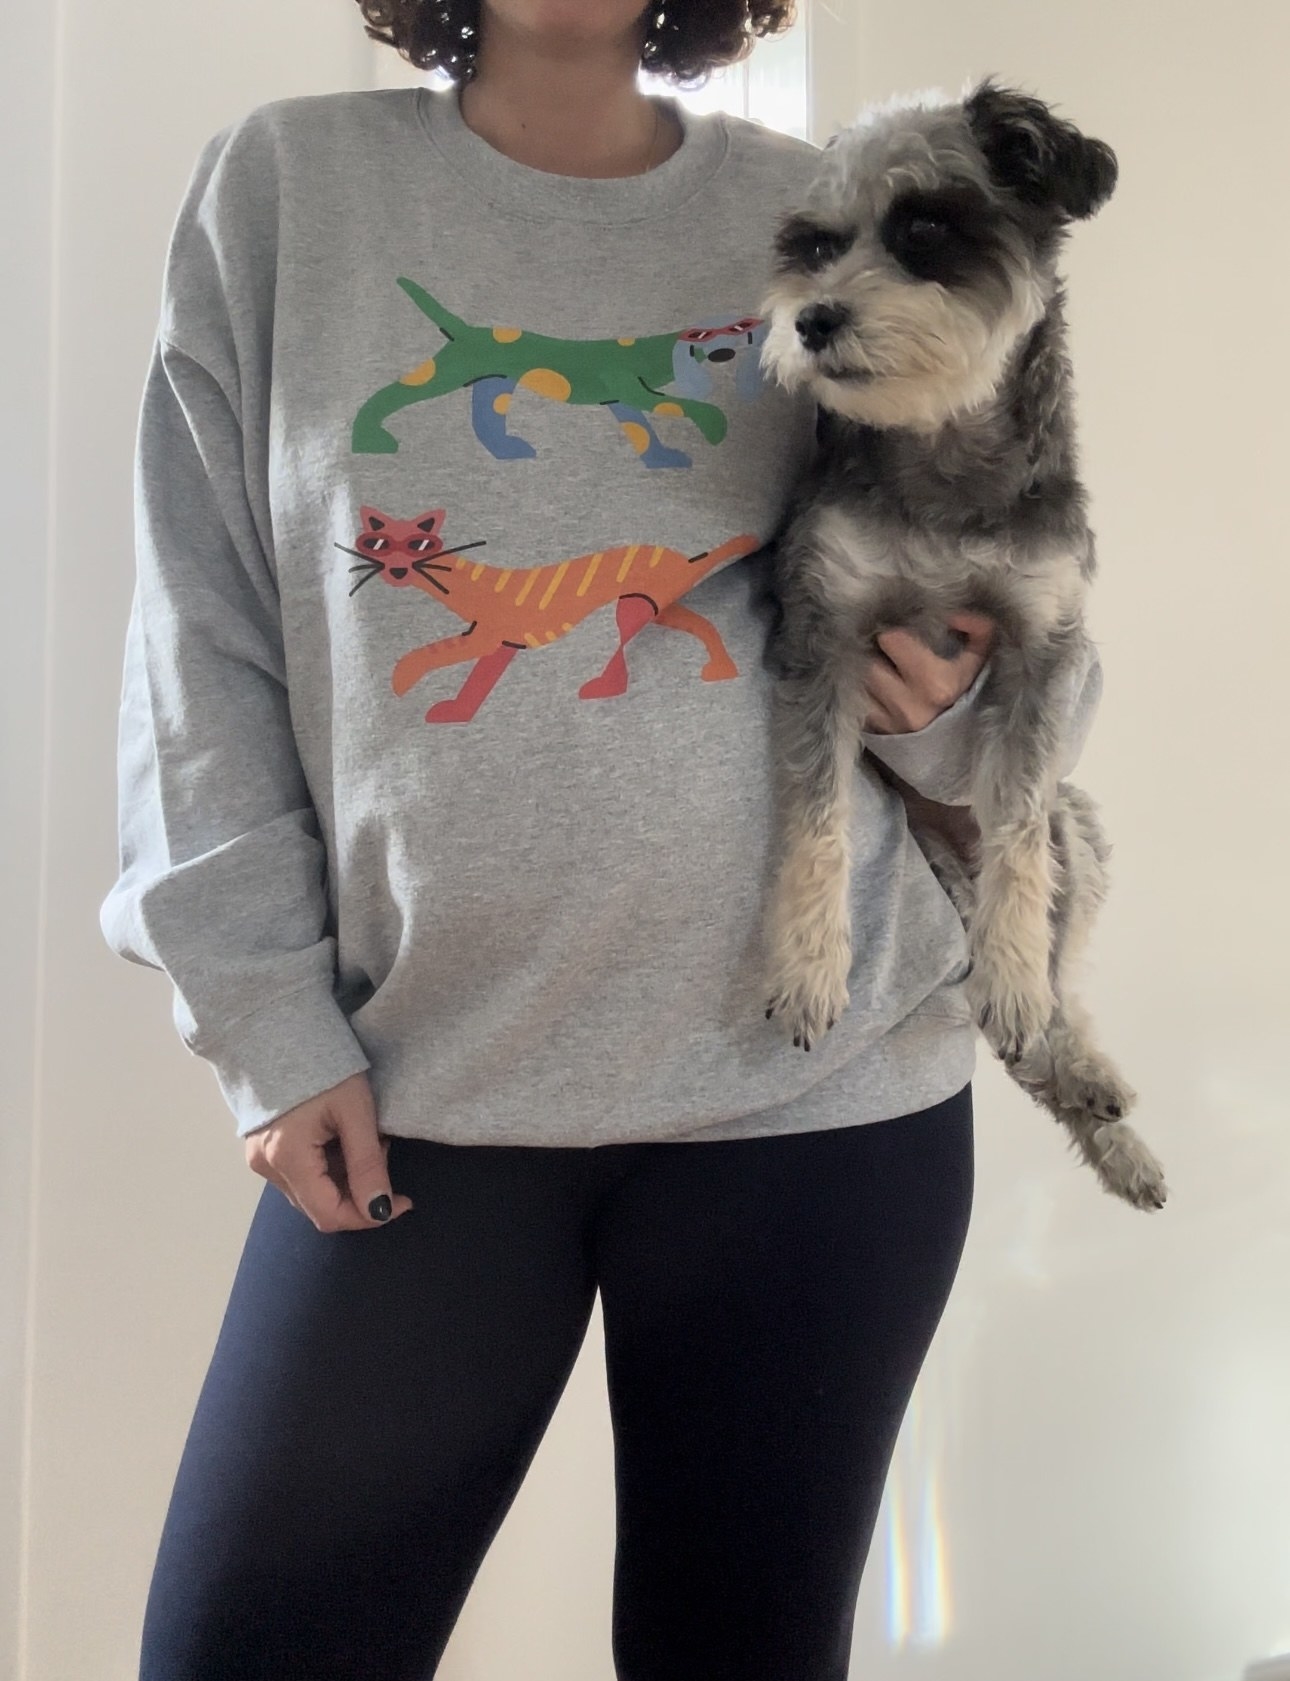 a model holding a small grey and white dog and wearing the grey sweatshirt with art of a blue and green dog and a pink and orange cat